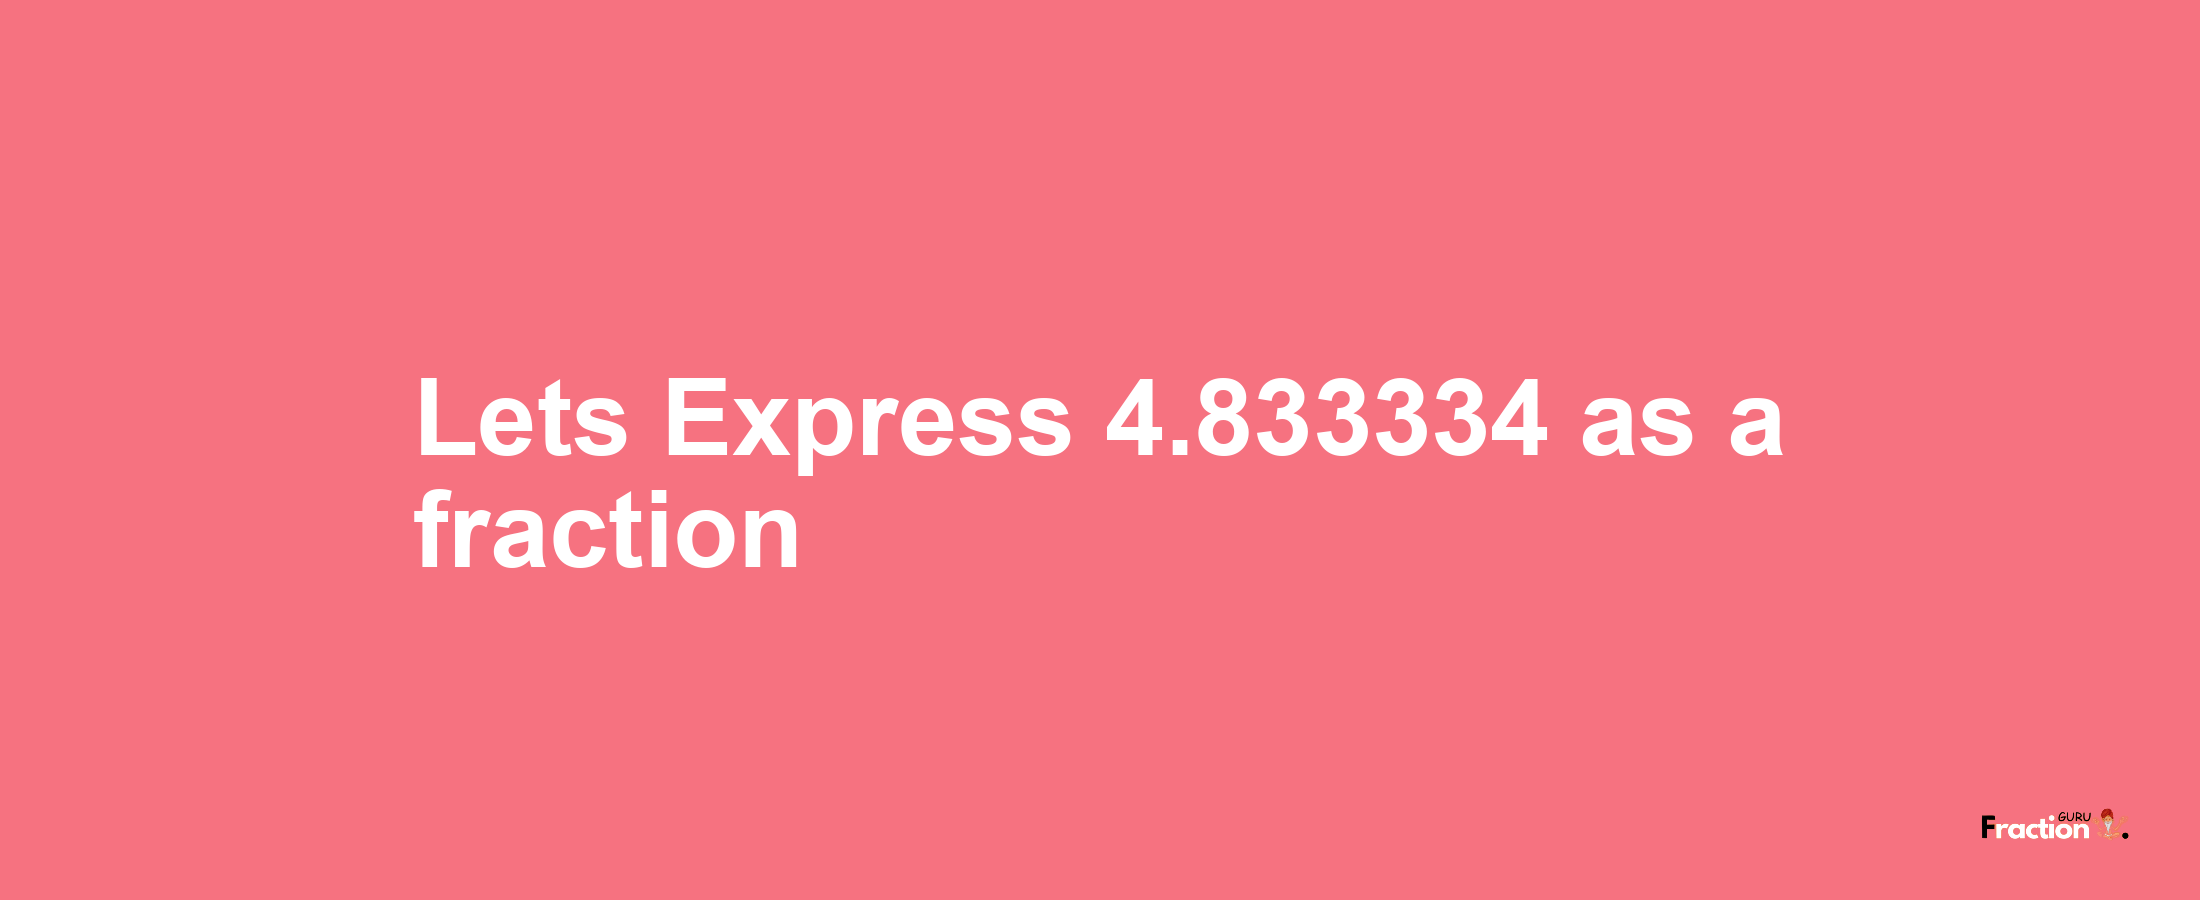 Lets Express 4.833334 as afraction